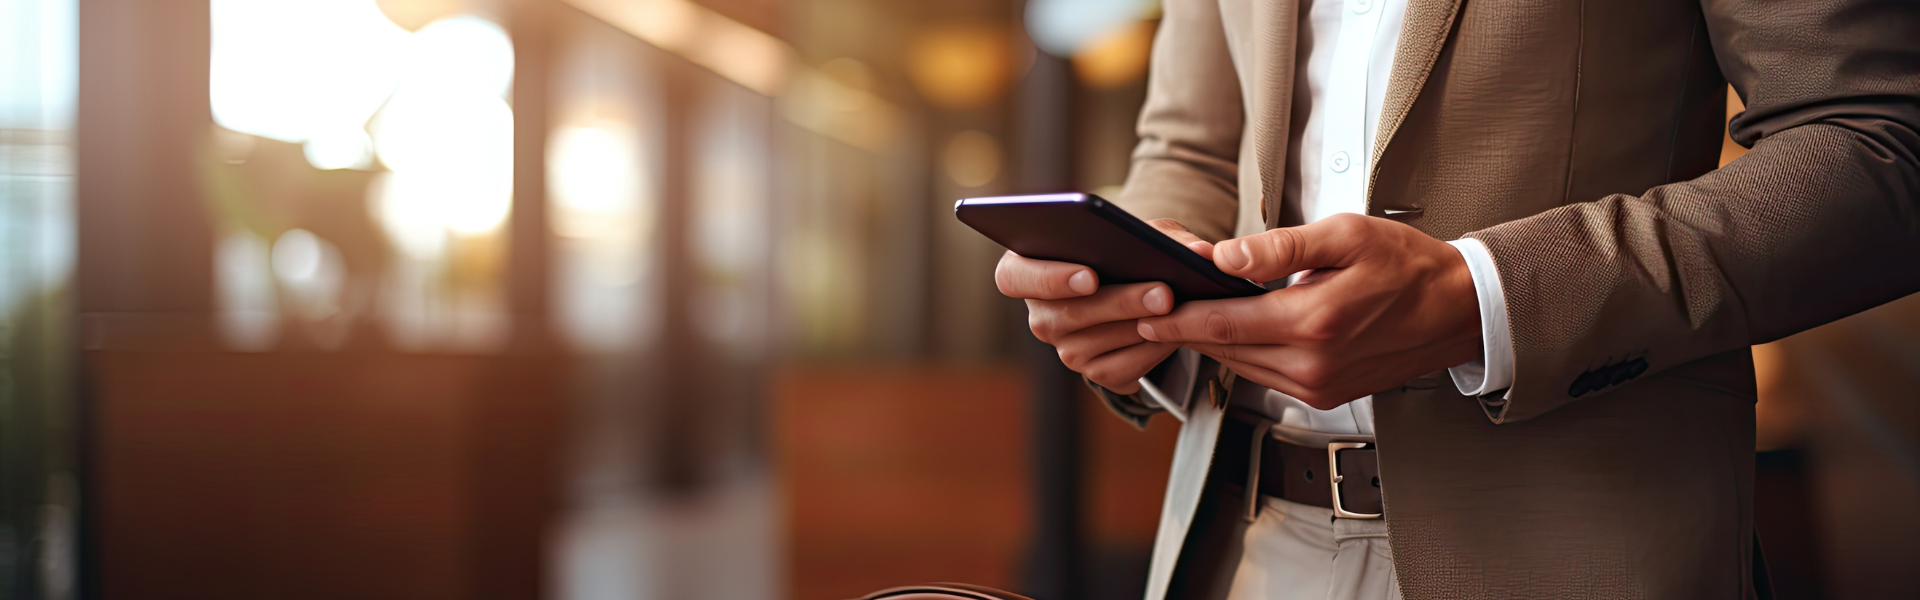 6 Ways Hotel Mobile Check-In Improves Hotel Guest Experiences